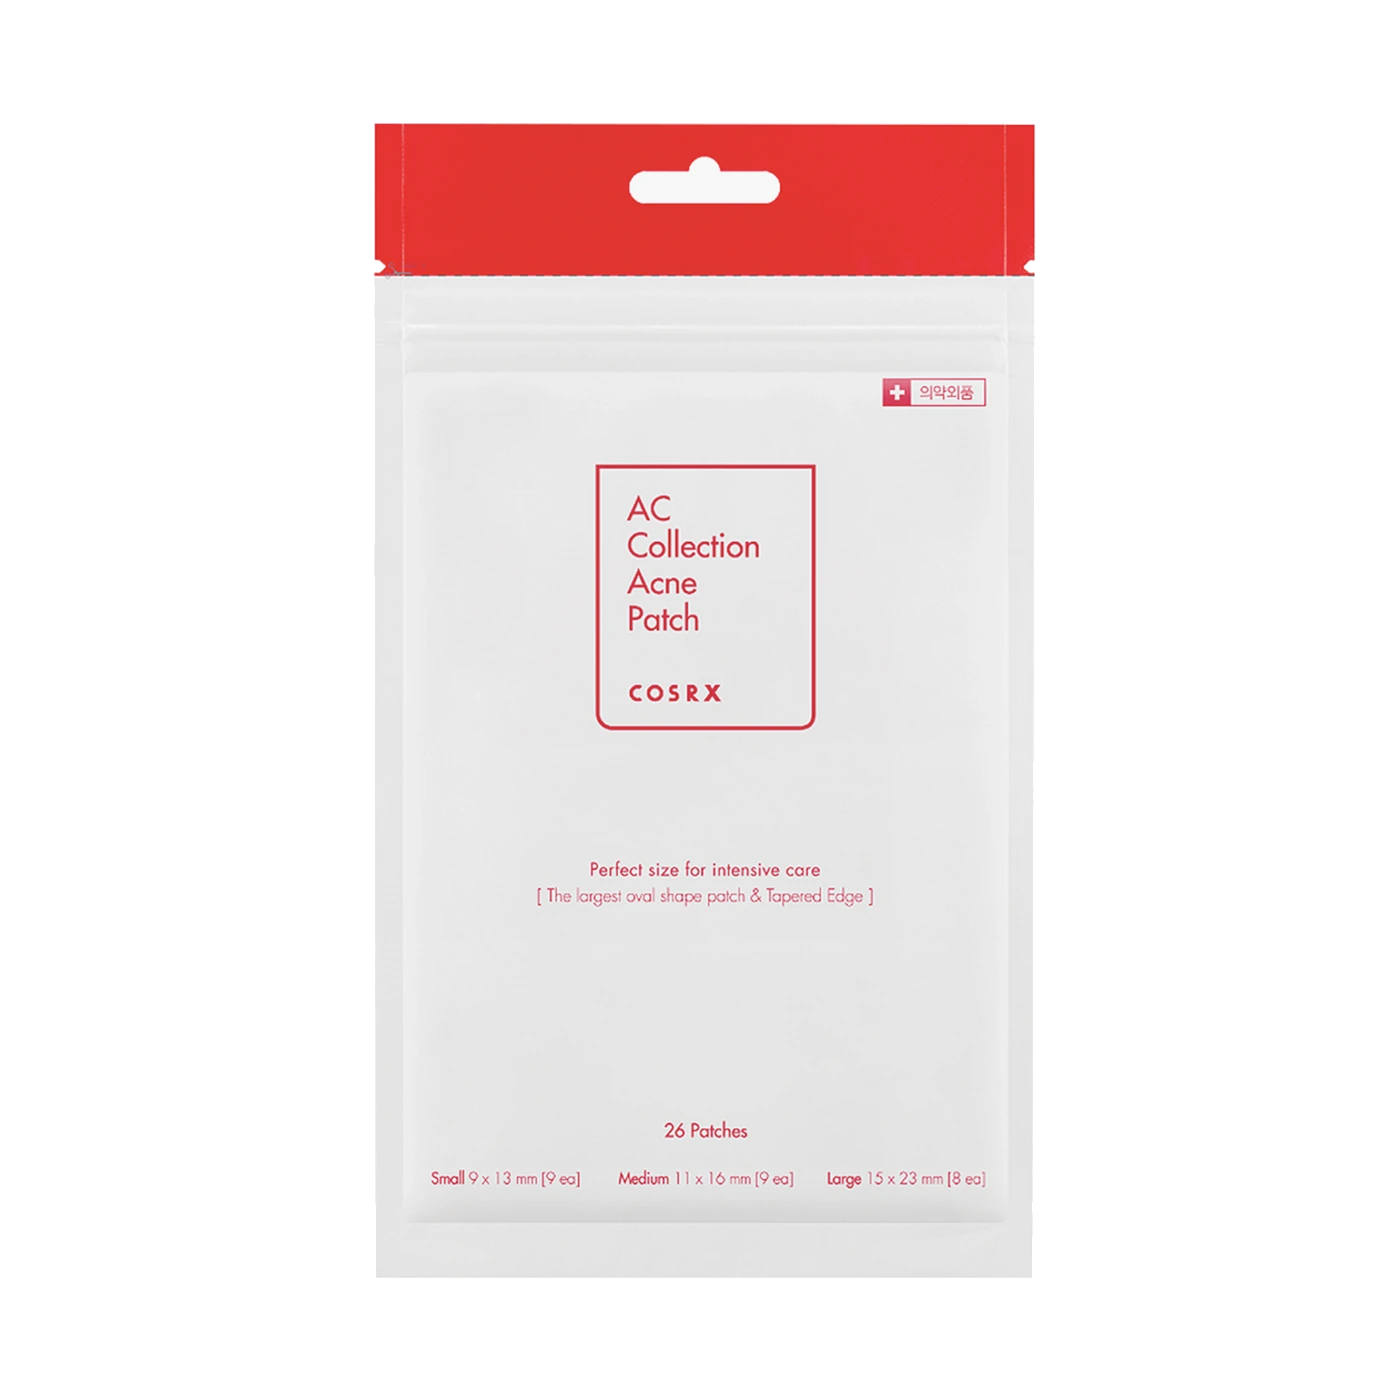 COSRX AC Collection Acne Patch Pimple Pickel Hydrokolloid Pflaster